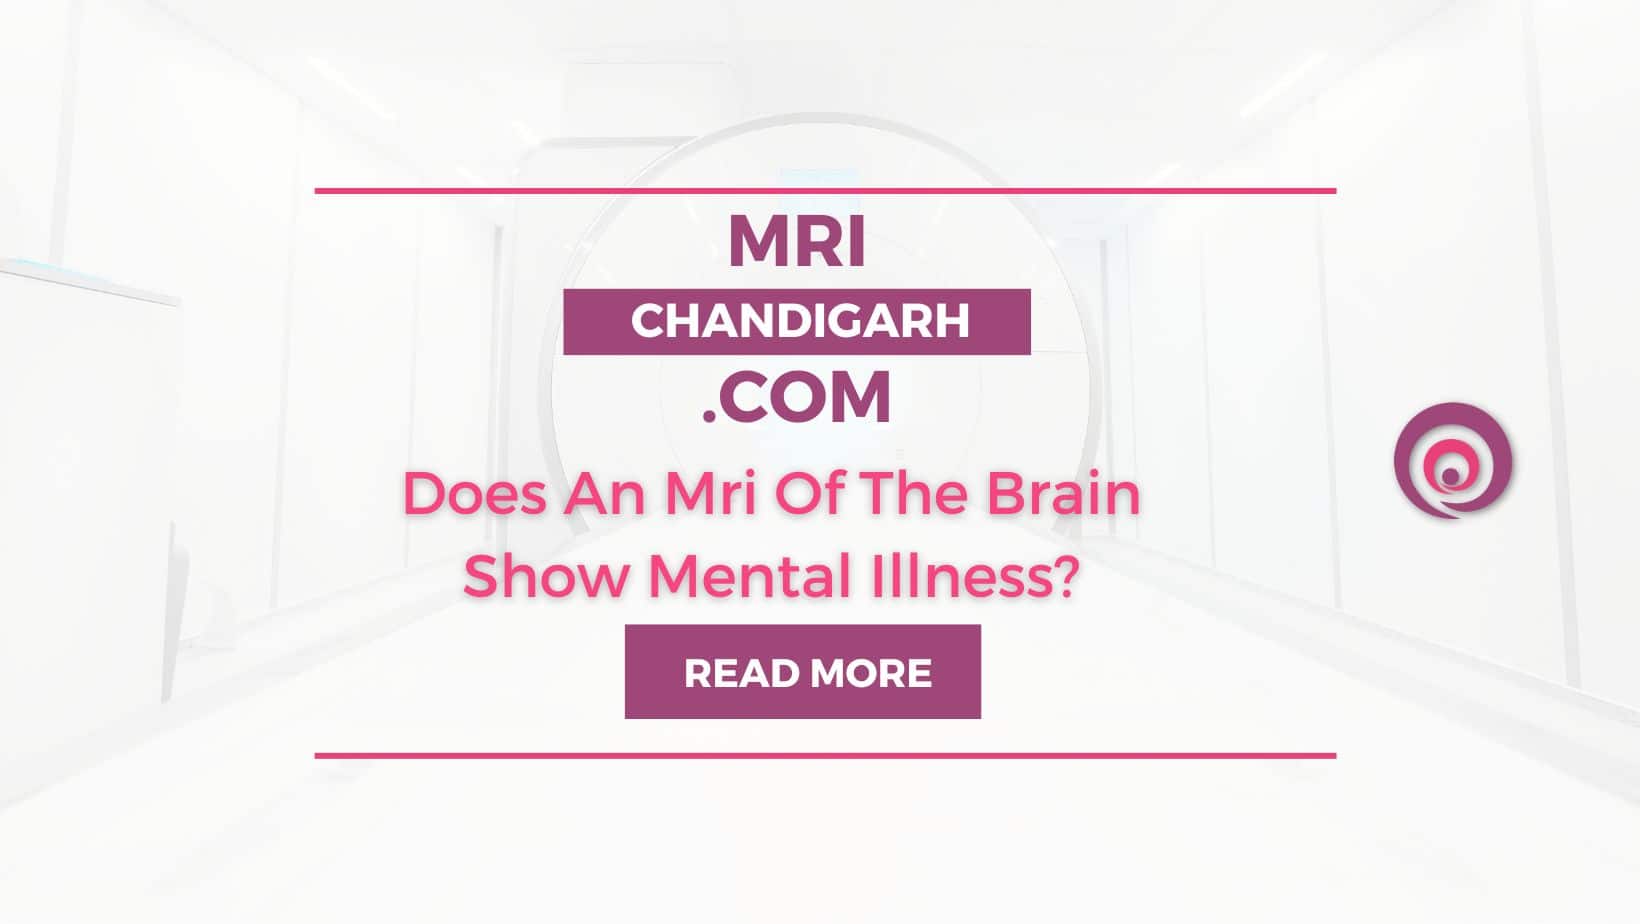 Does An Mri Of The Brain Show Mental Illness?